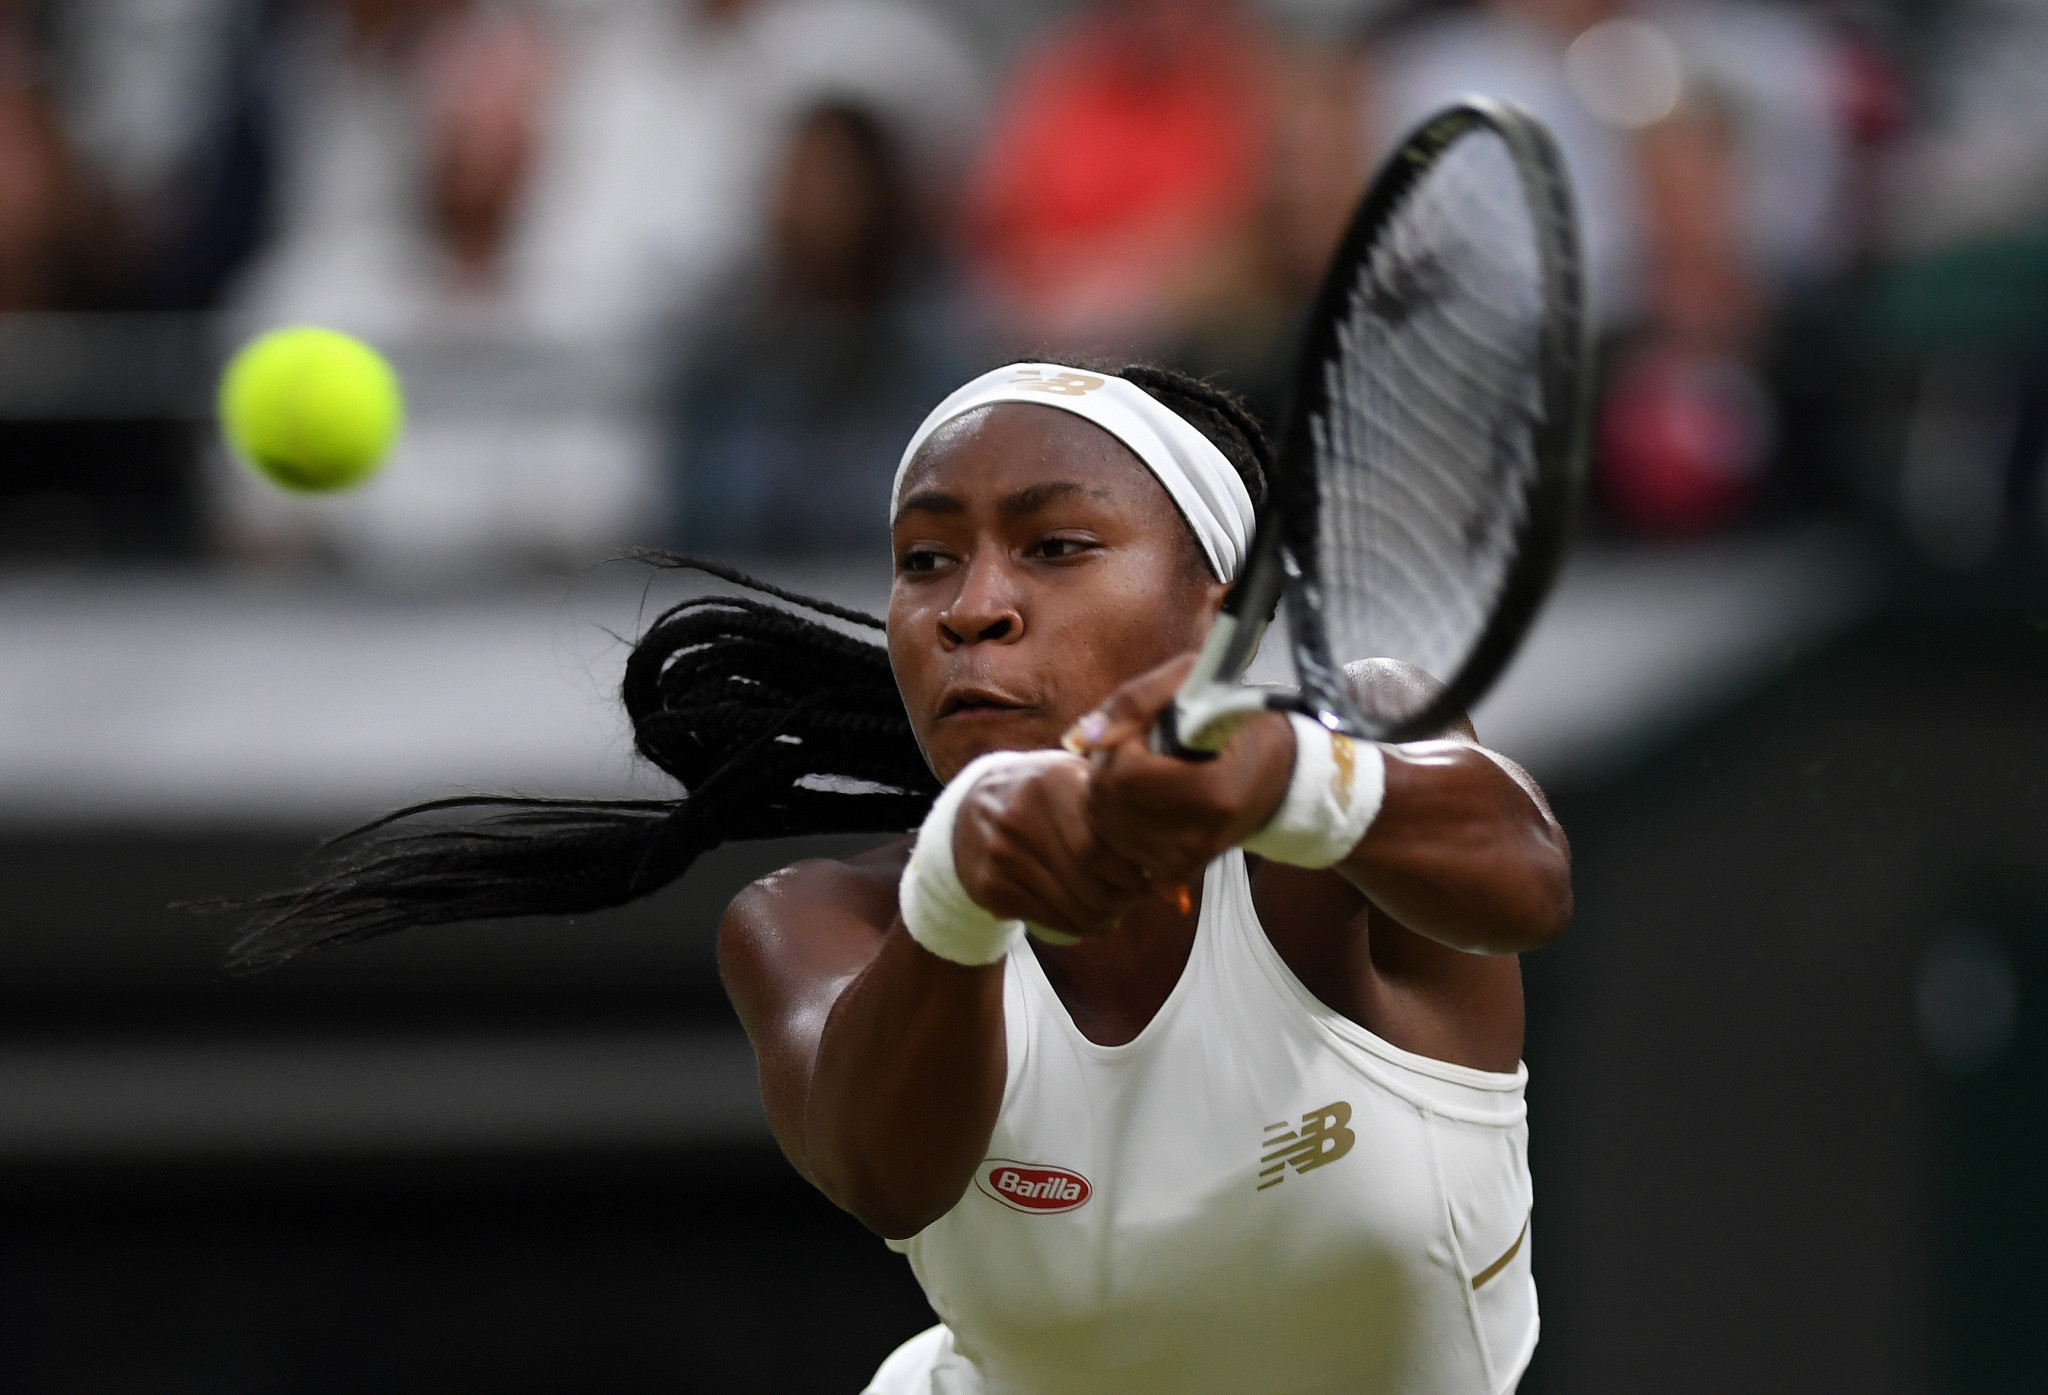 American youngster Coco Gauff continued her winning run at Wimbledon ©Getty Images